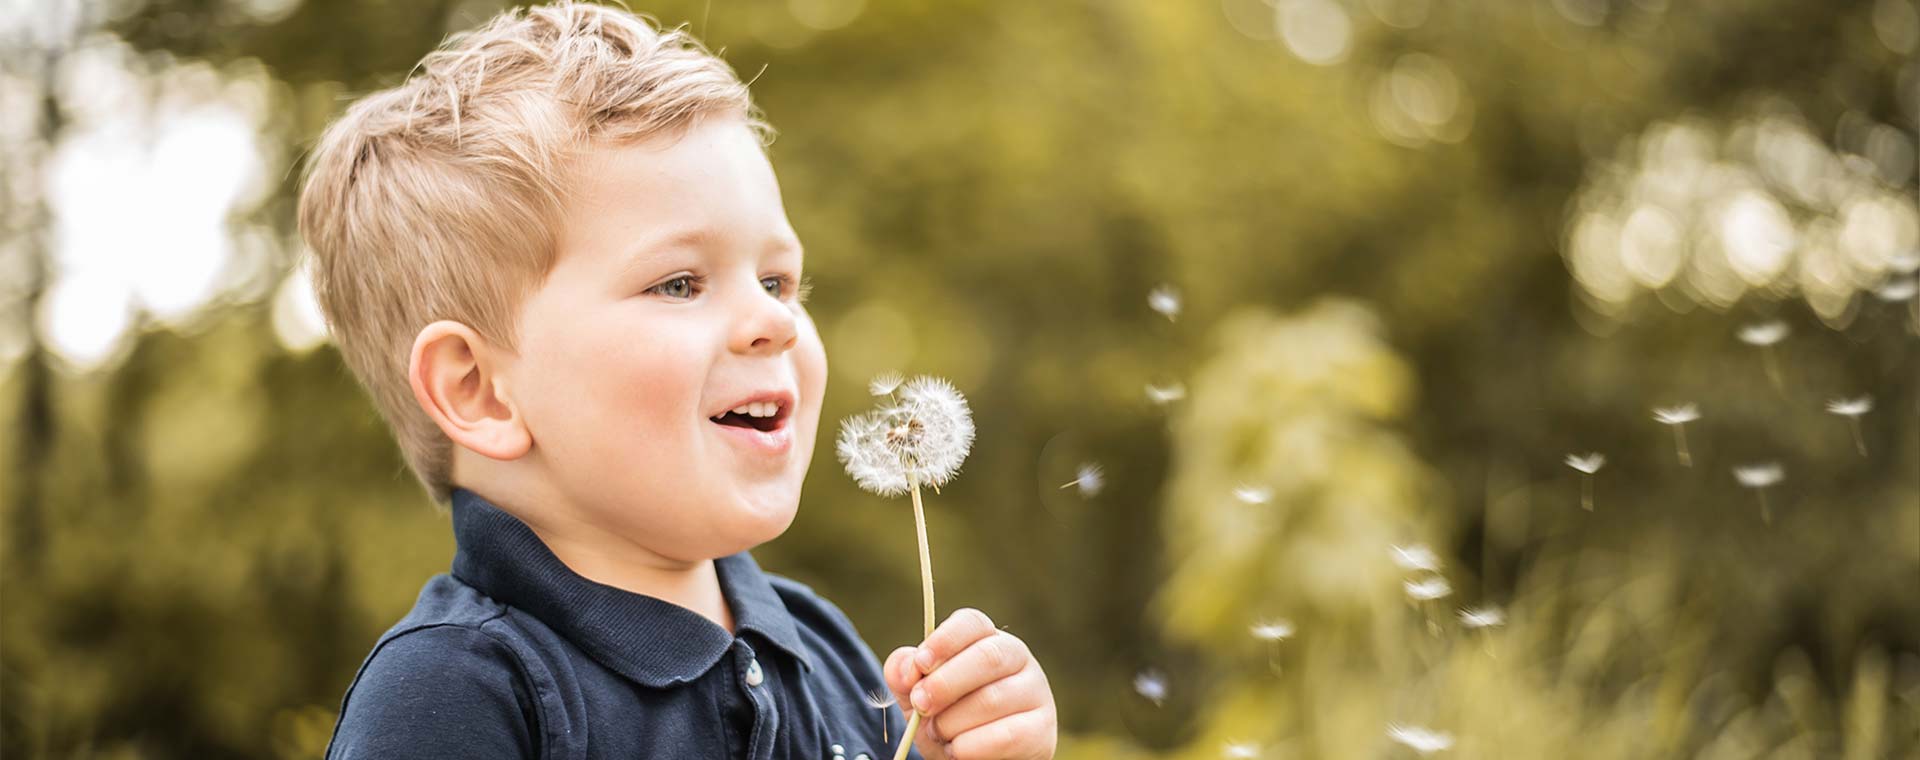 A toddler boy is standing in a field and holding a dandelion that has gone to seed. He blows gently on the dandelion and the seeds float away.